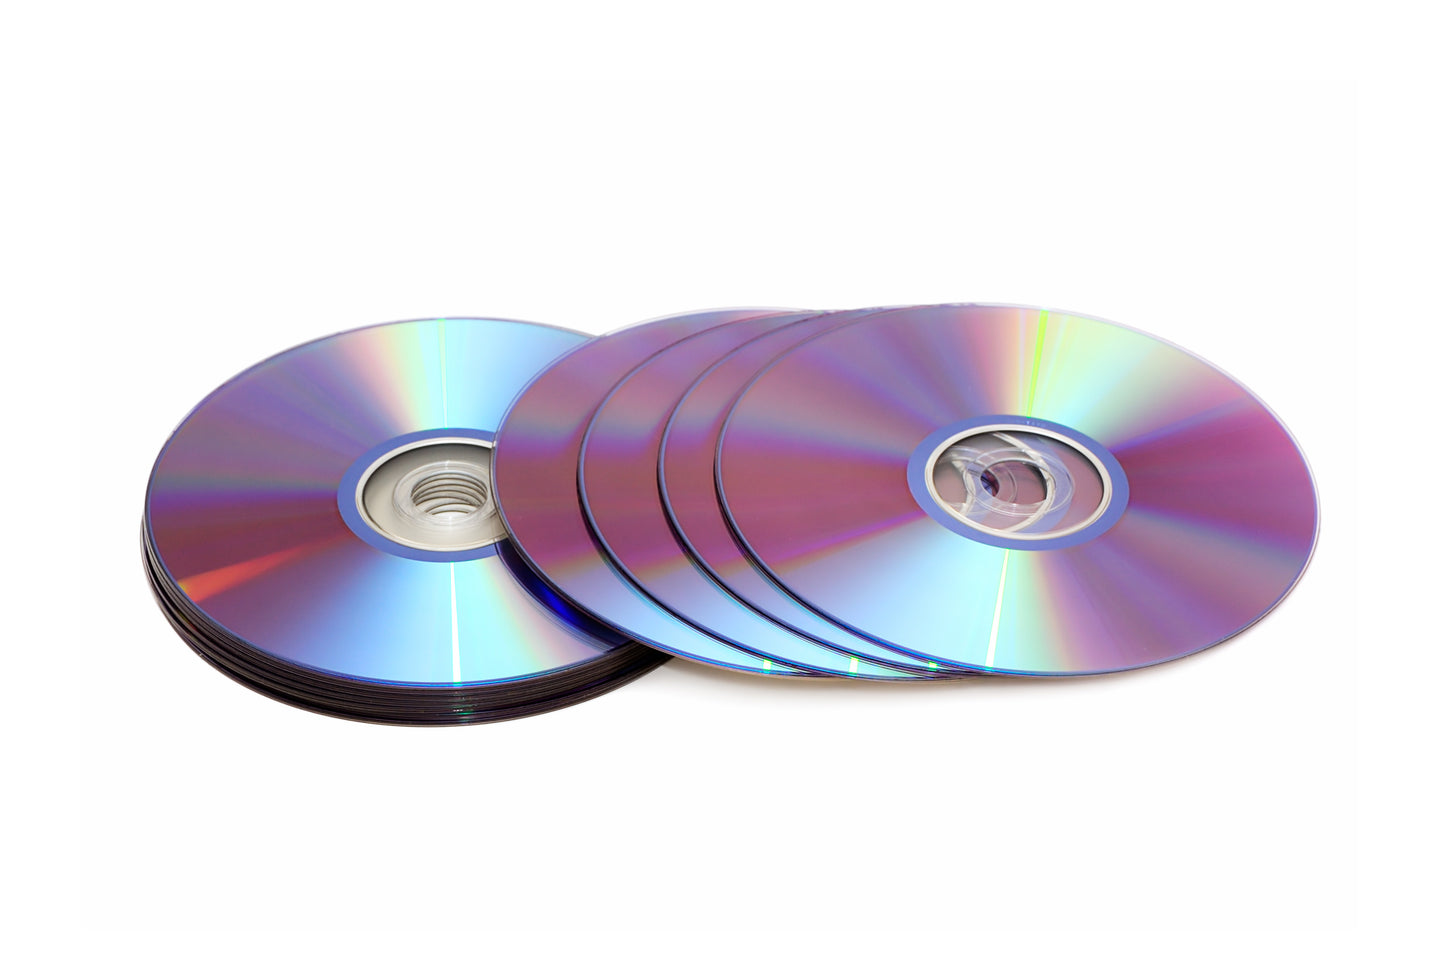 Blank CDs for burning data and music